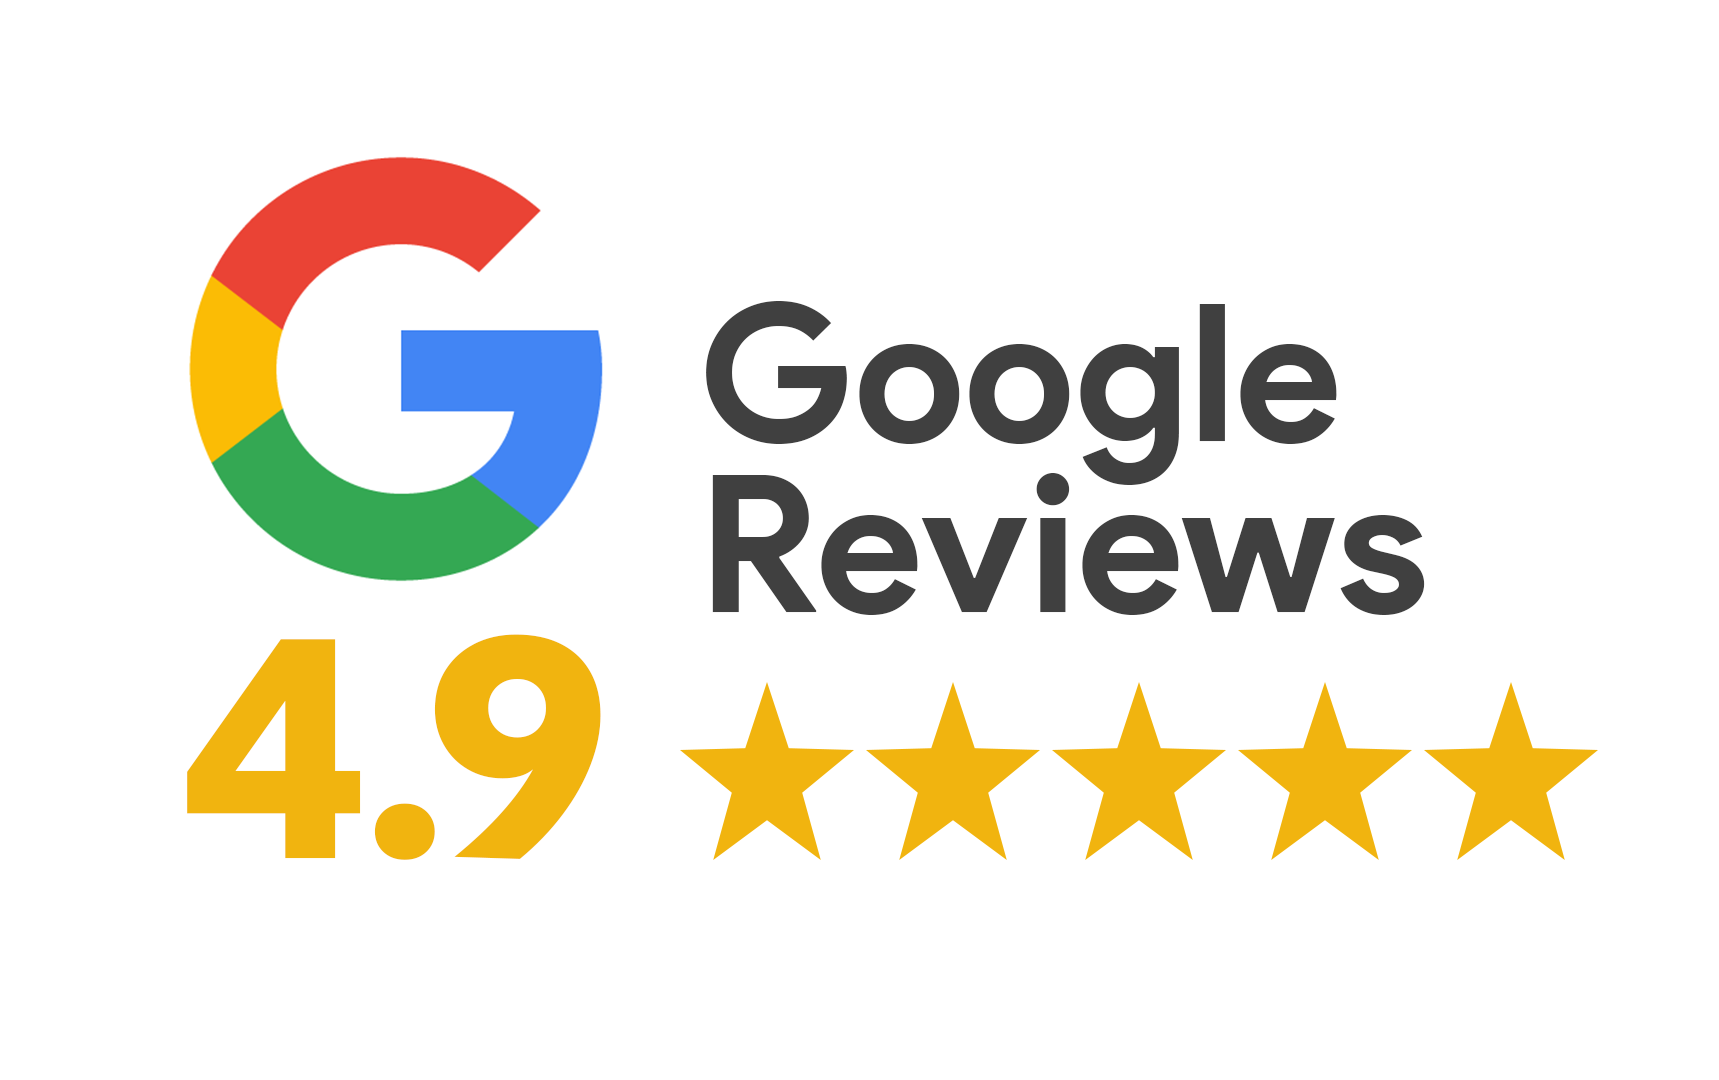 Google Review logo showing we are a top rated home cleaning company in Manhattan.